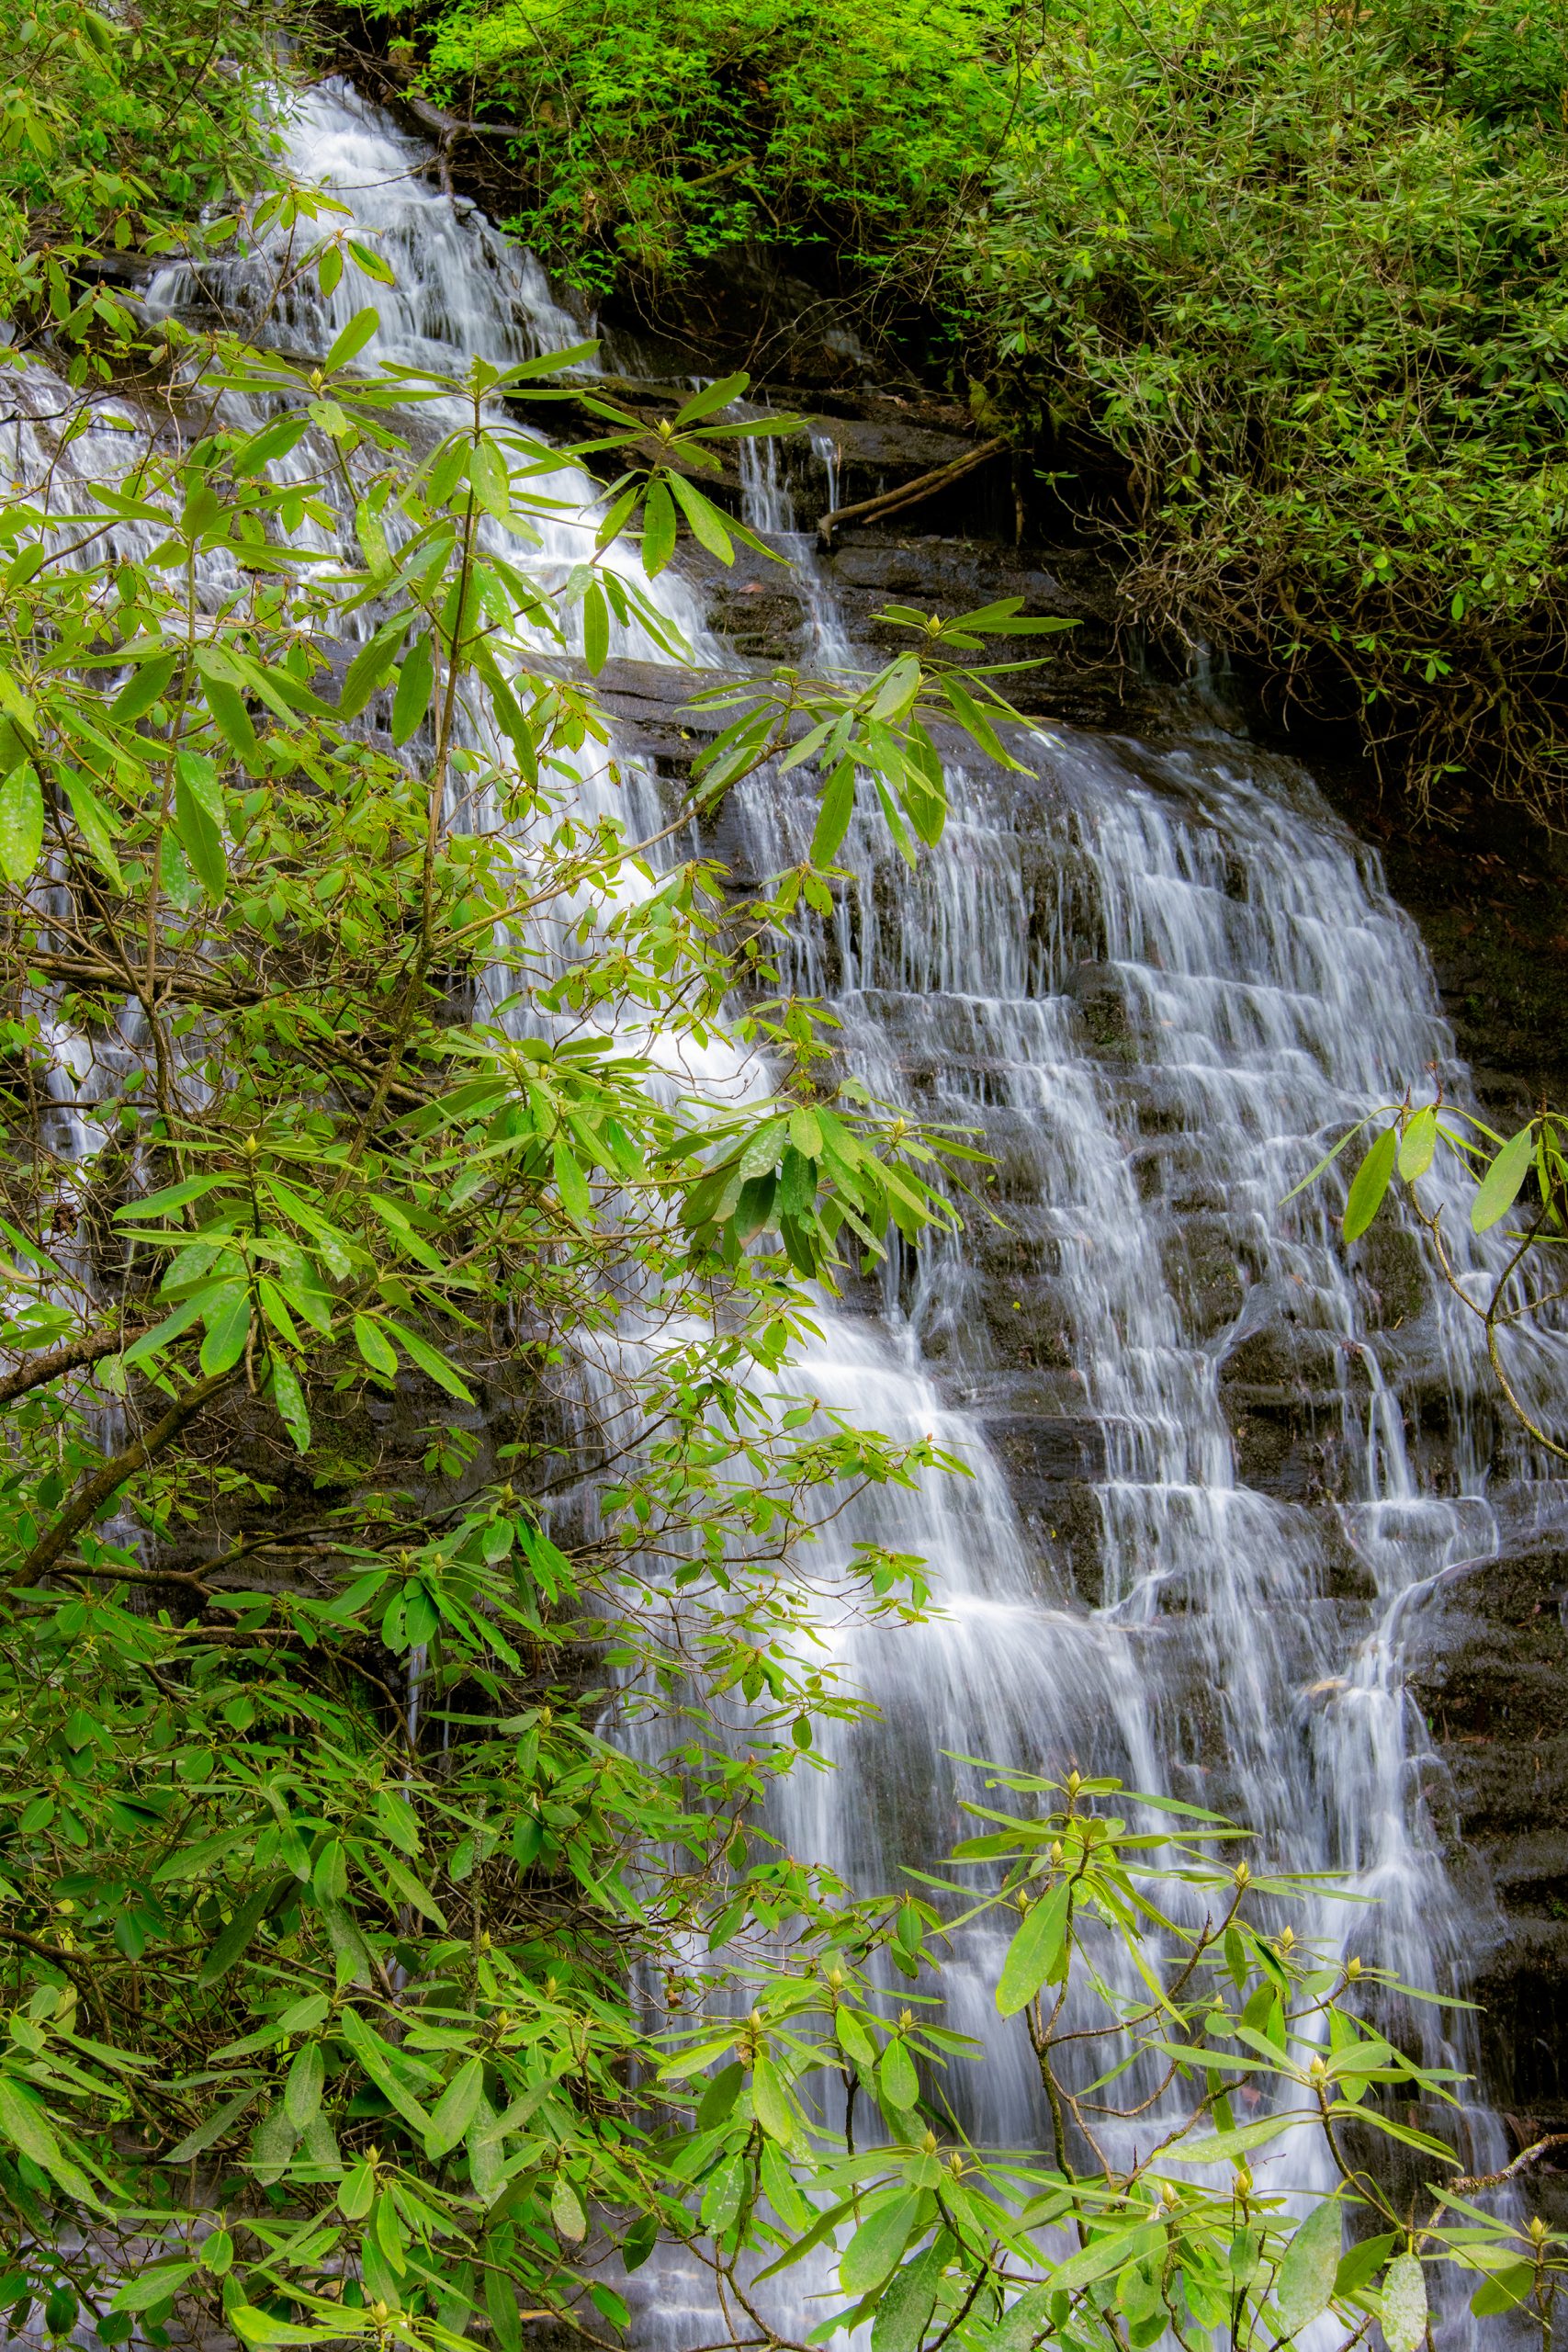 Named for the Spoonauger family who lived nearby along the Chattooga River, the cascading Spoonauger Falls is enveloped by a thicket of rhododendron.